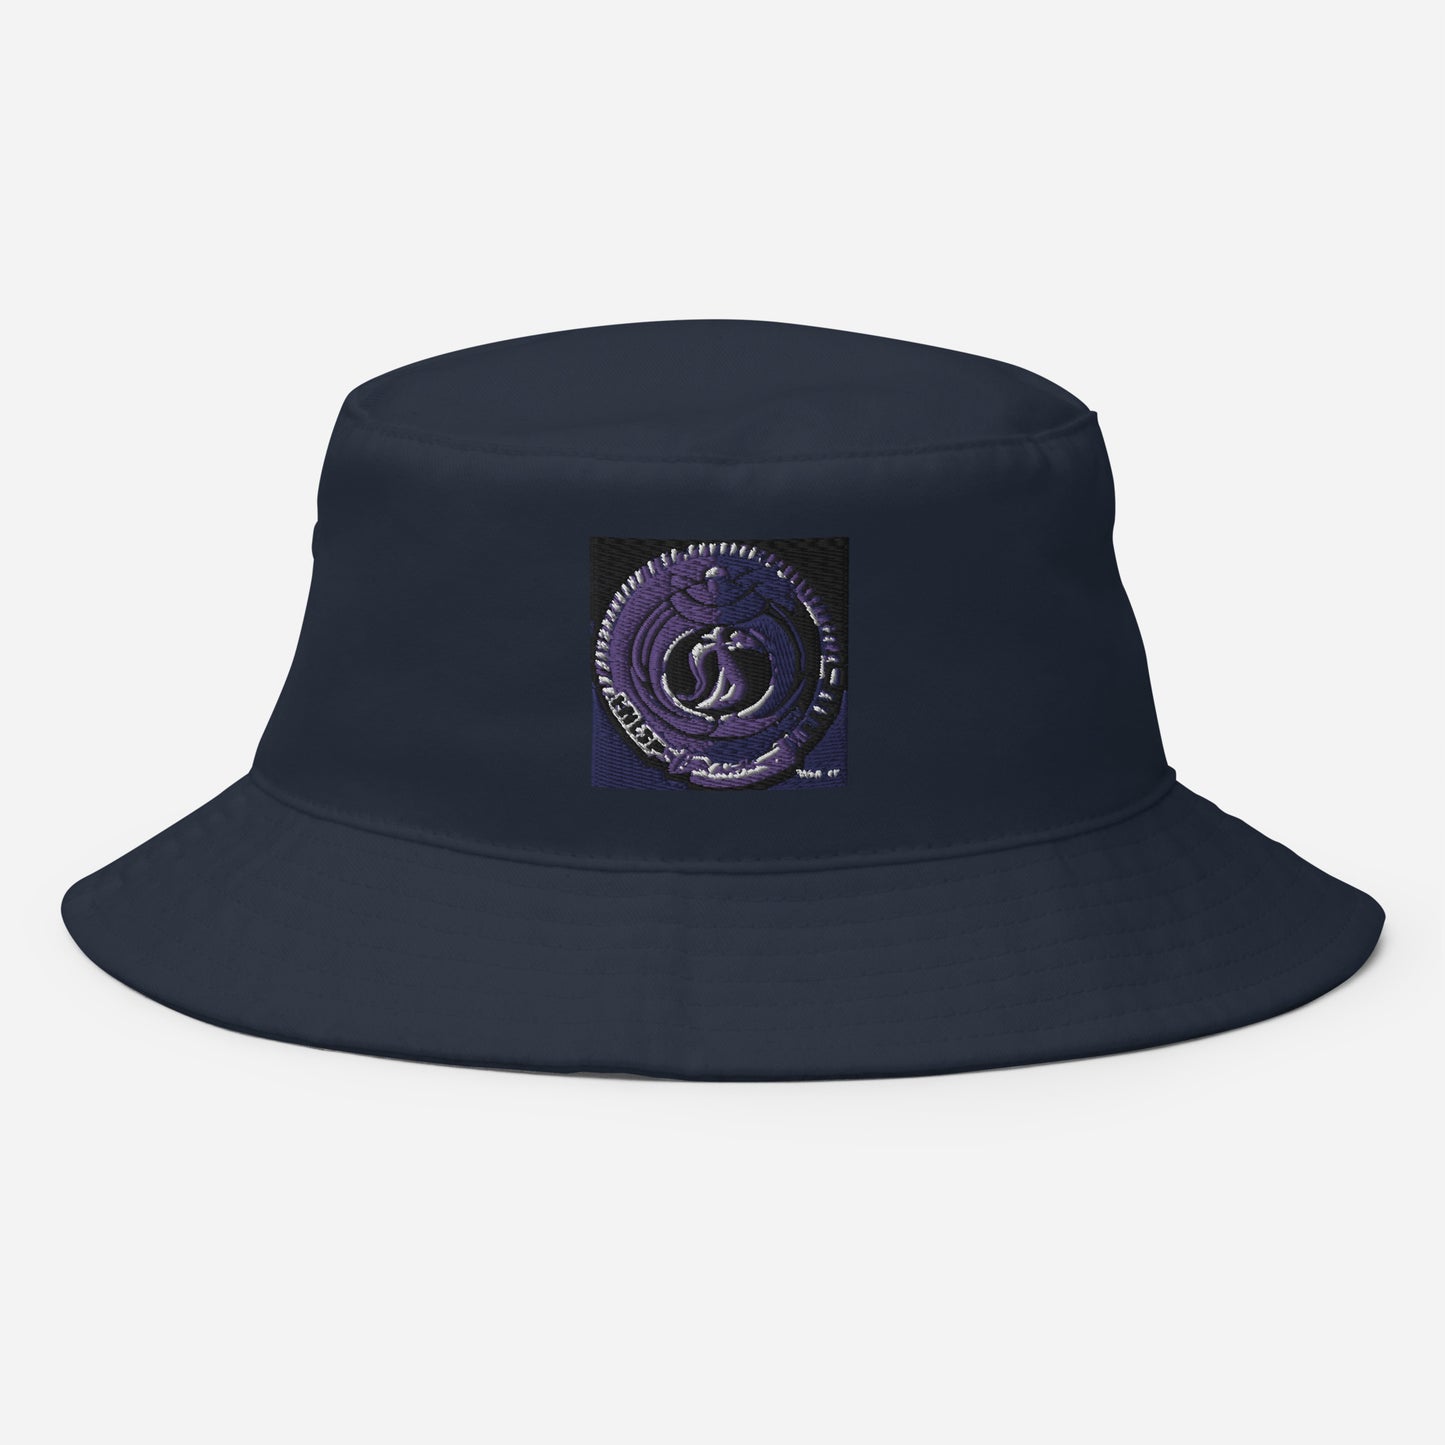 Rich and Rich Bucket Hat